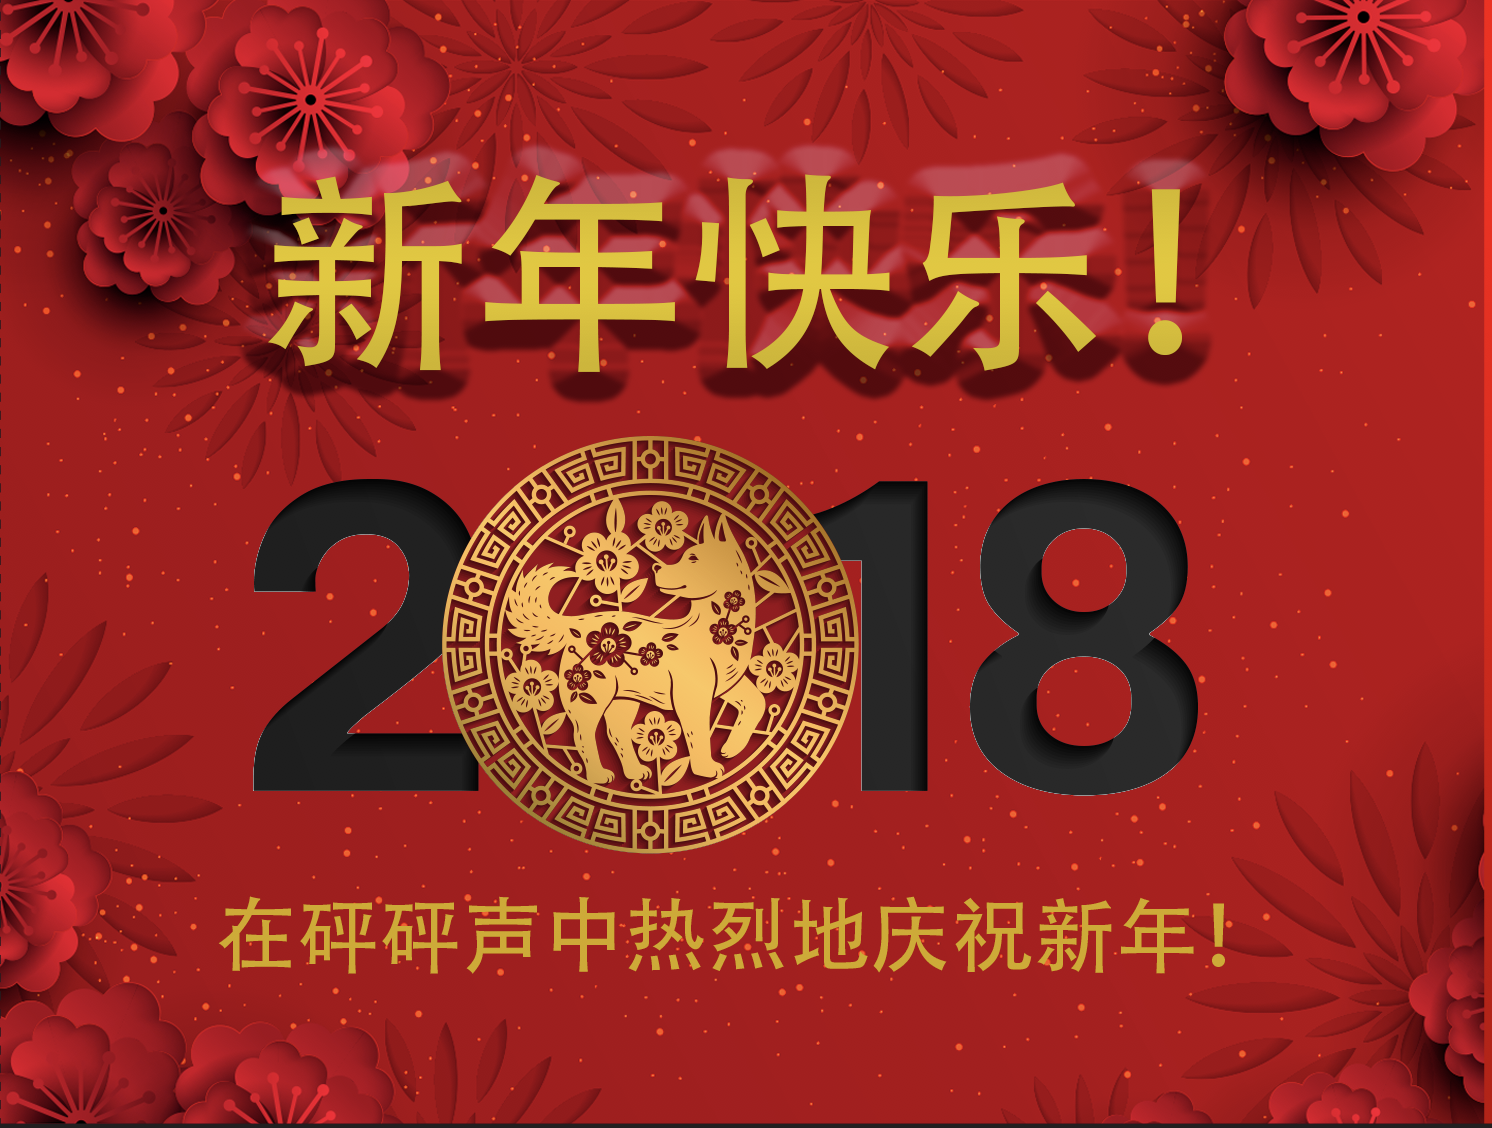 Screenshot 2018 01 23 13.48.25 - Digital Chinese New Year Foldable Gift Card. Receive digital gift card via email, you can print it, fold it and give!